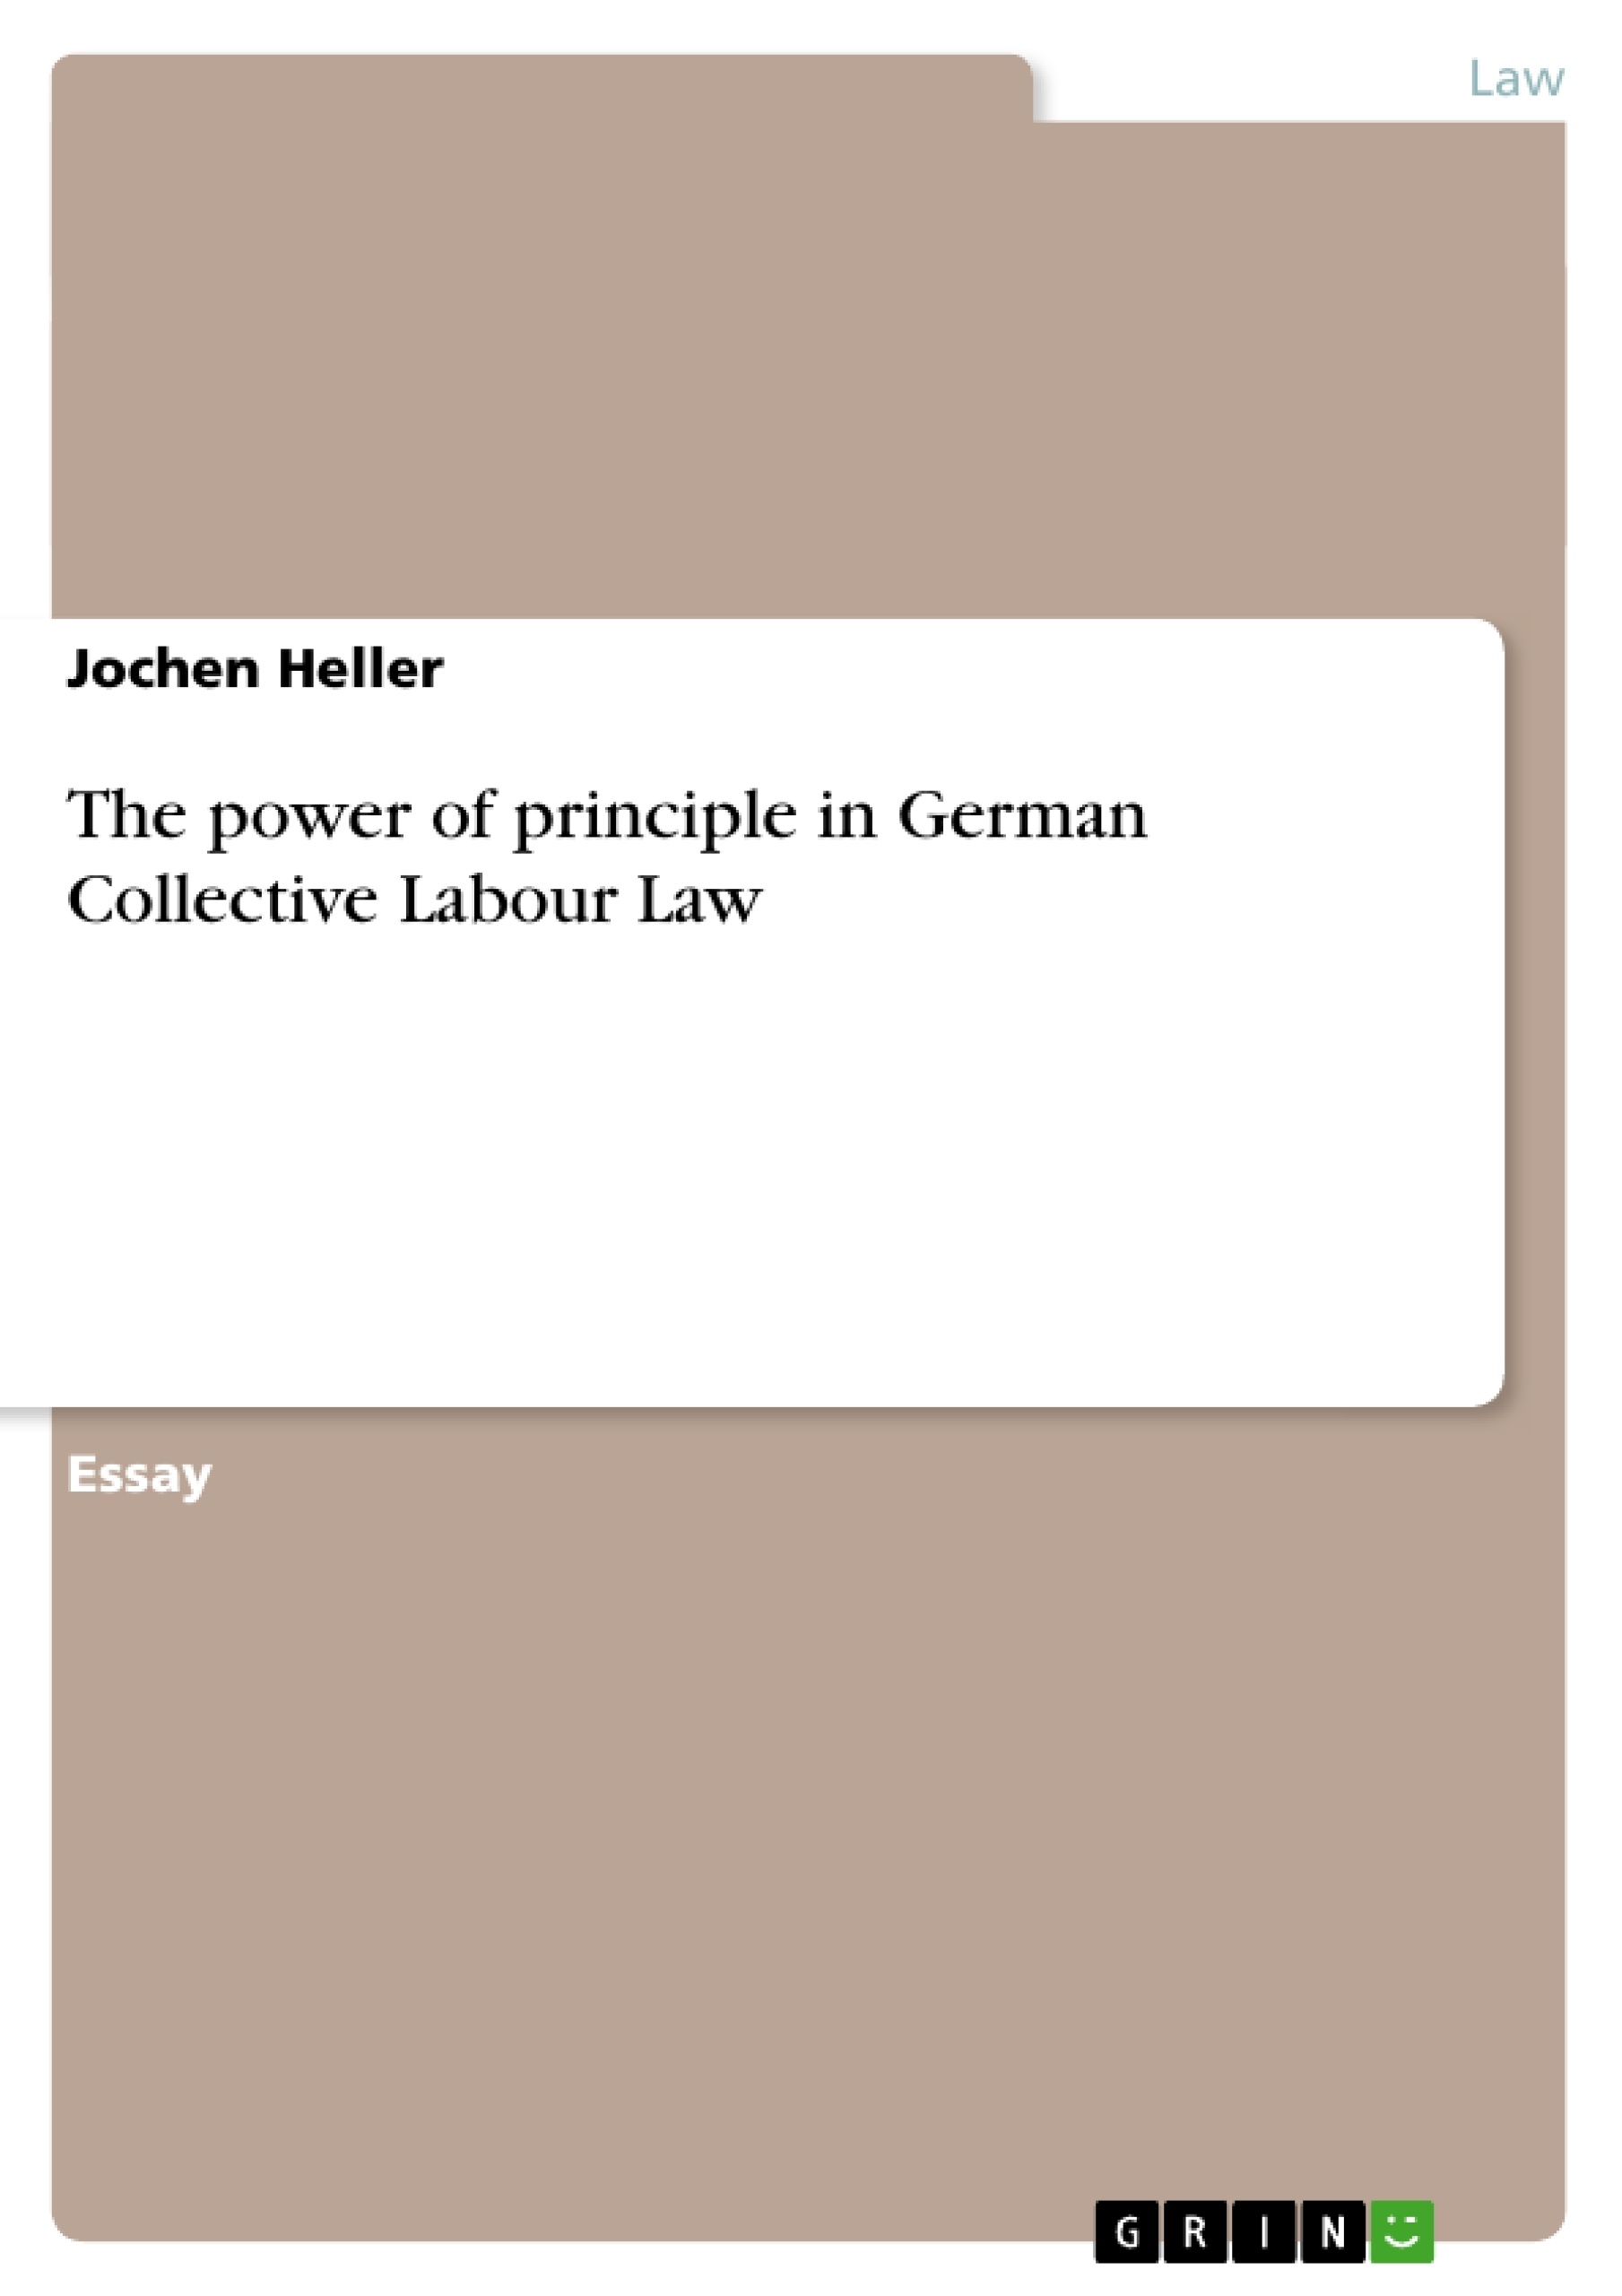 Title: The power of principle in German Collective Labour Law